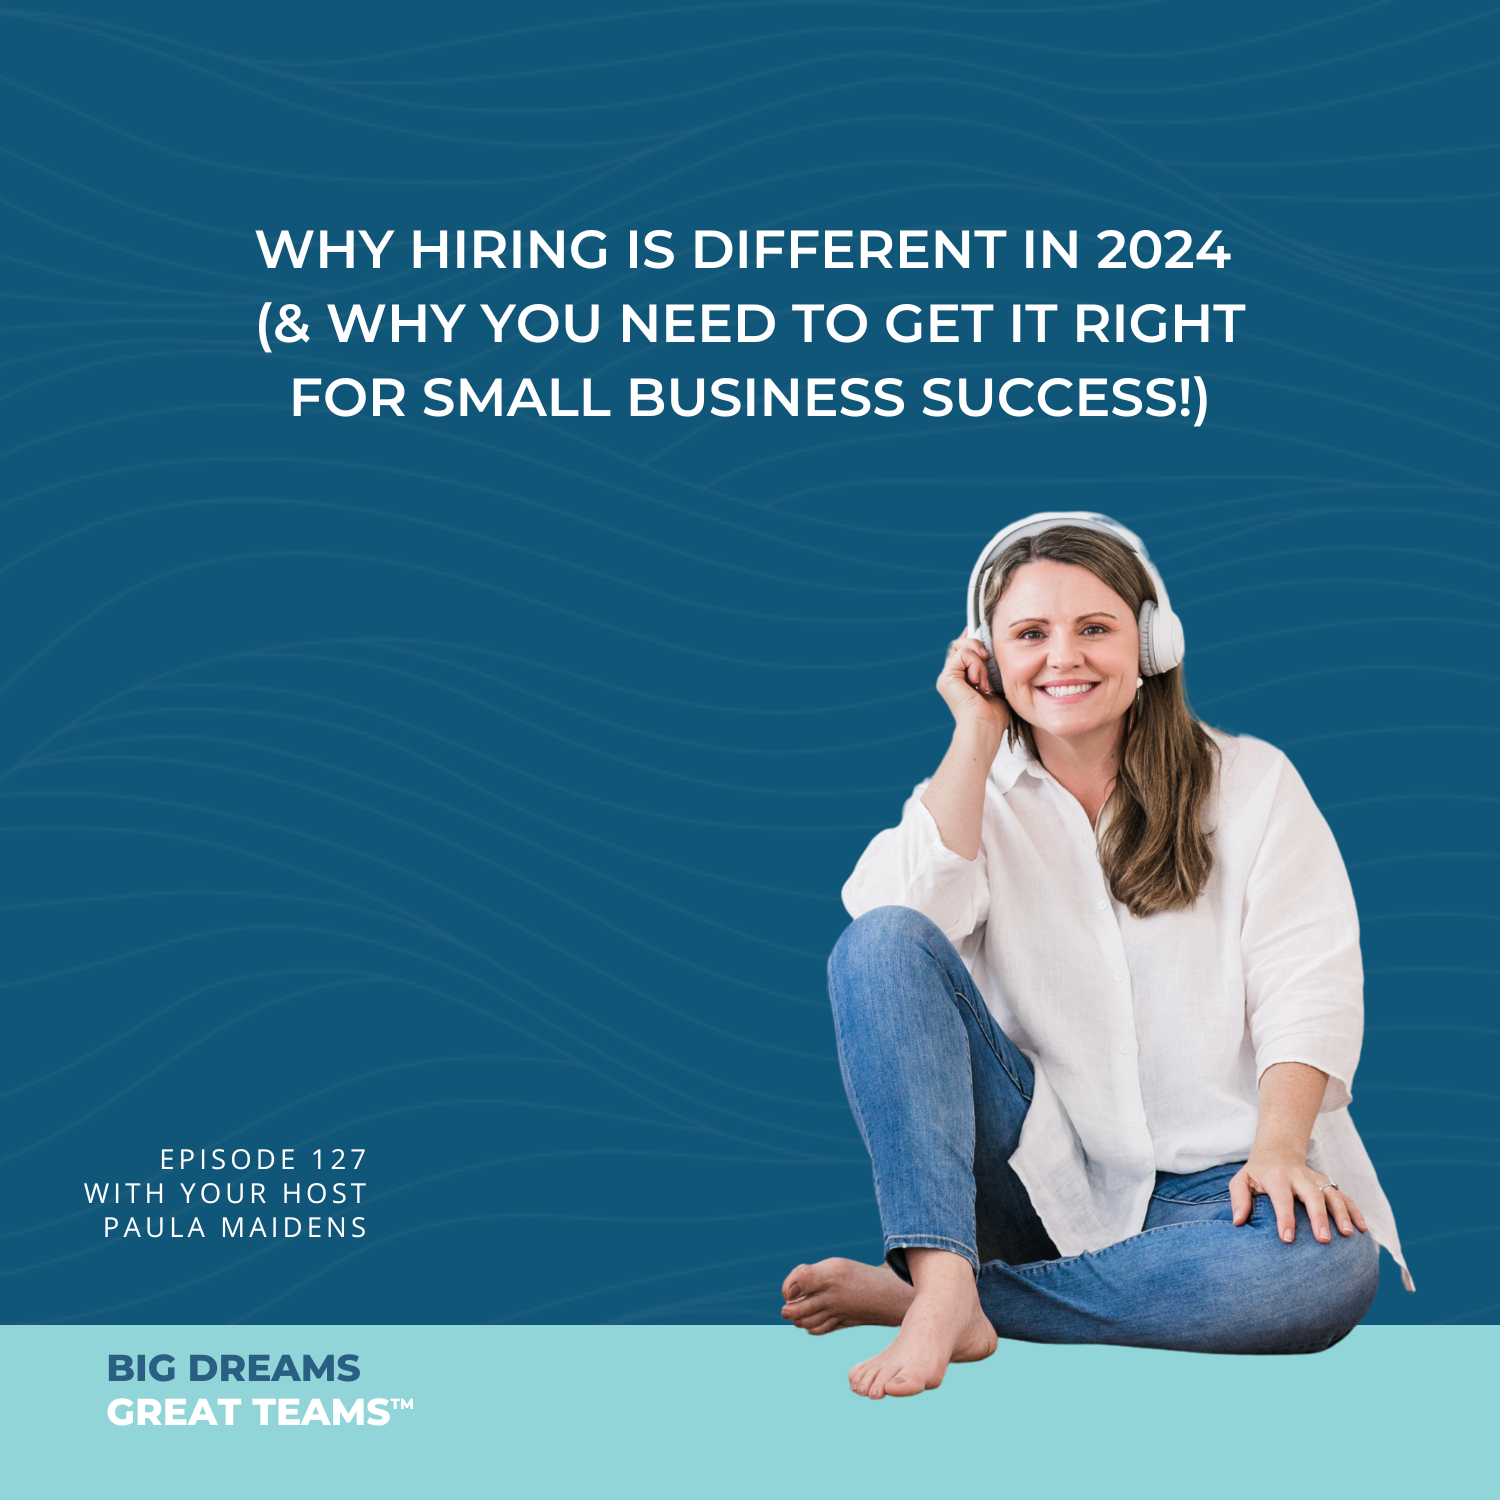 Episode #127 - Why Hiring is Different In 2024 (& Why You Need to Get It Right For Small Business Success!)